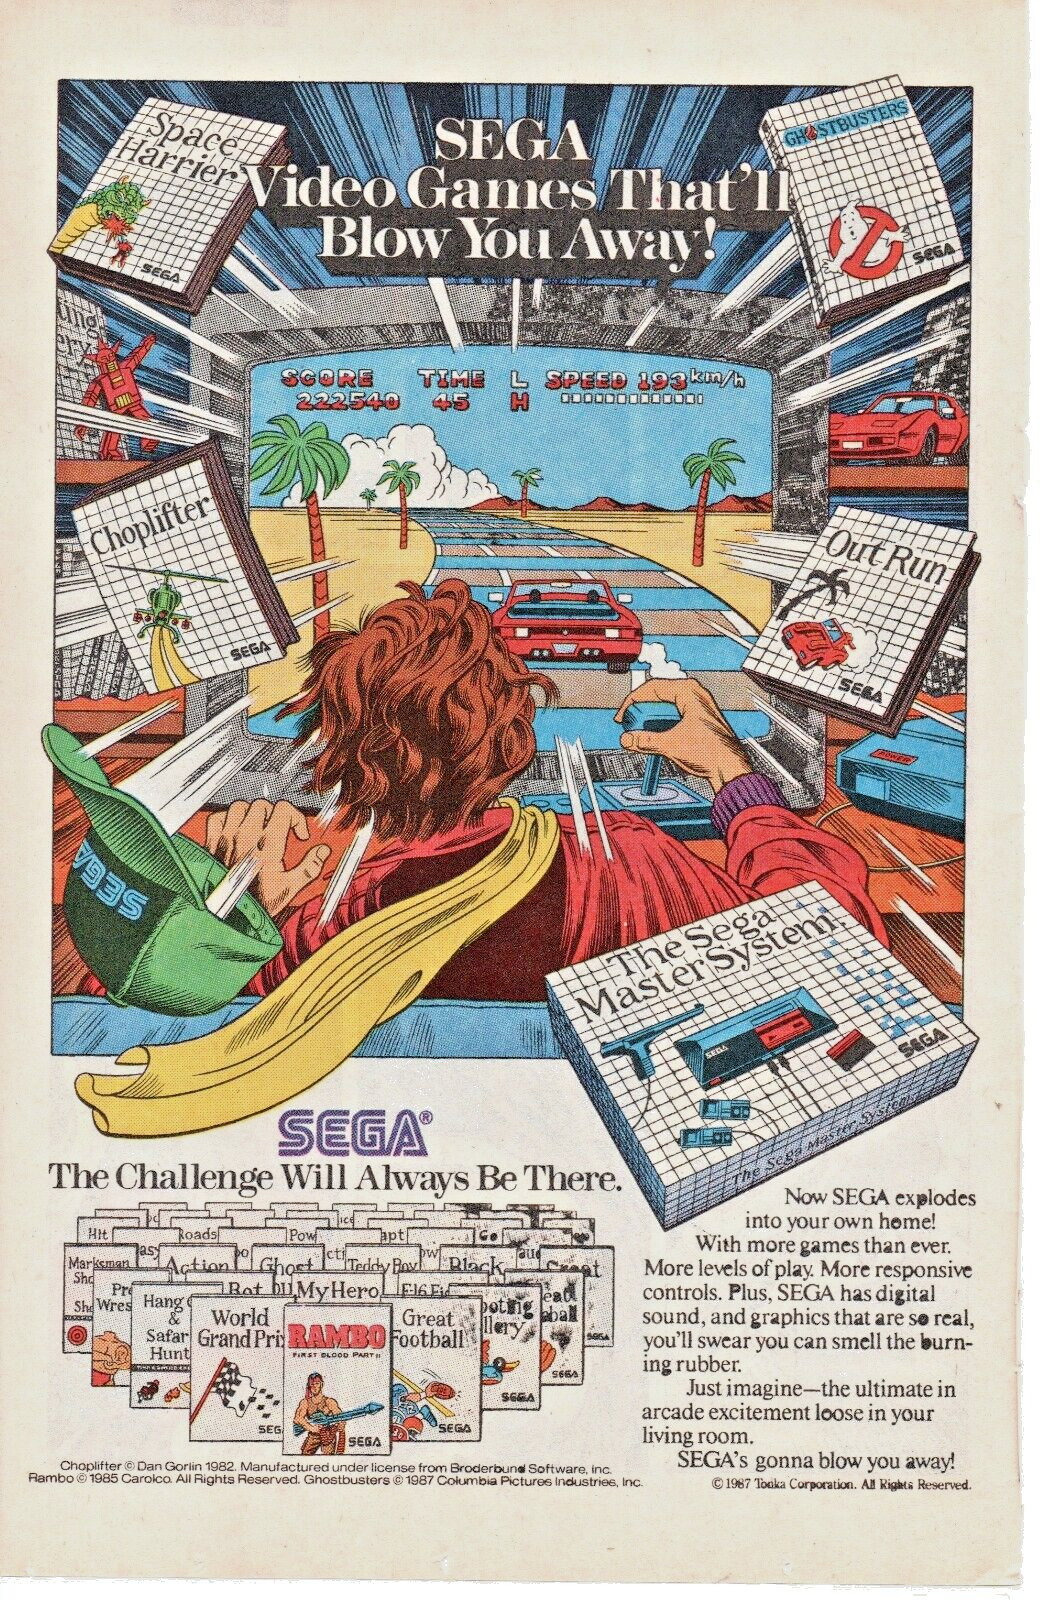 1982 THE SEGA MASTER SYSTEM Video Game Console PRINT AD - THAT\'LL BLOW YOU AWAY